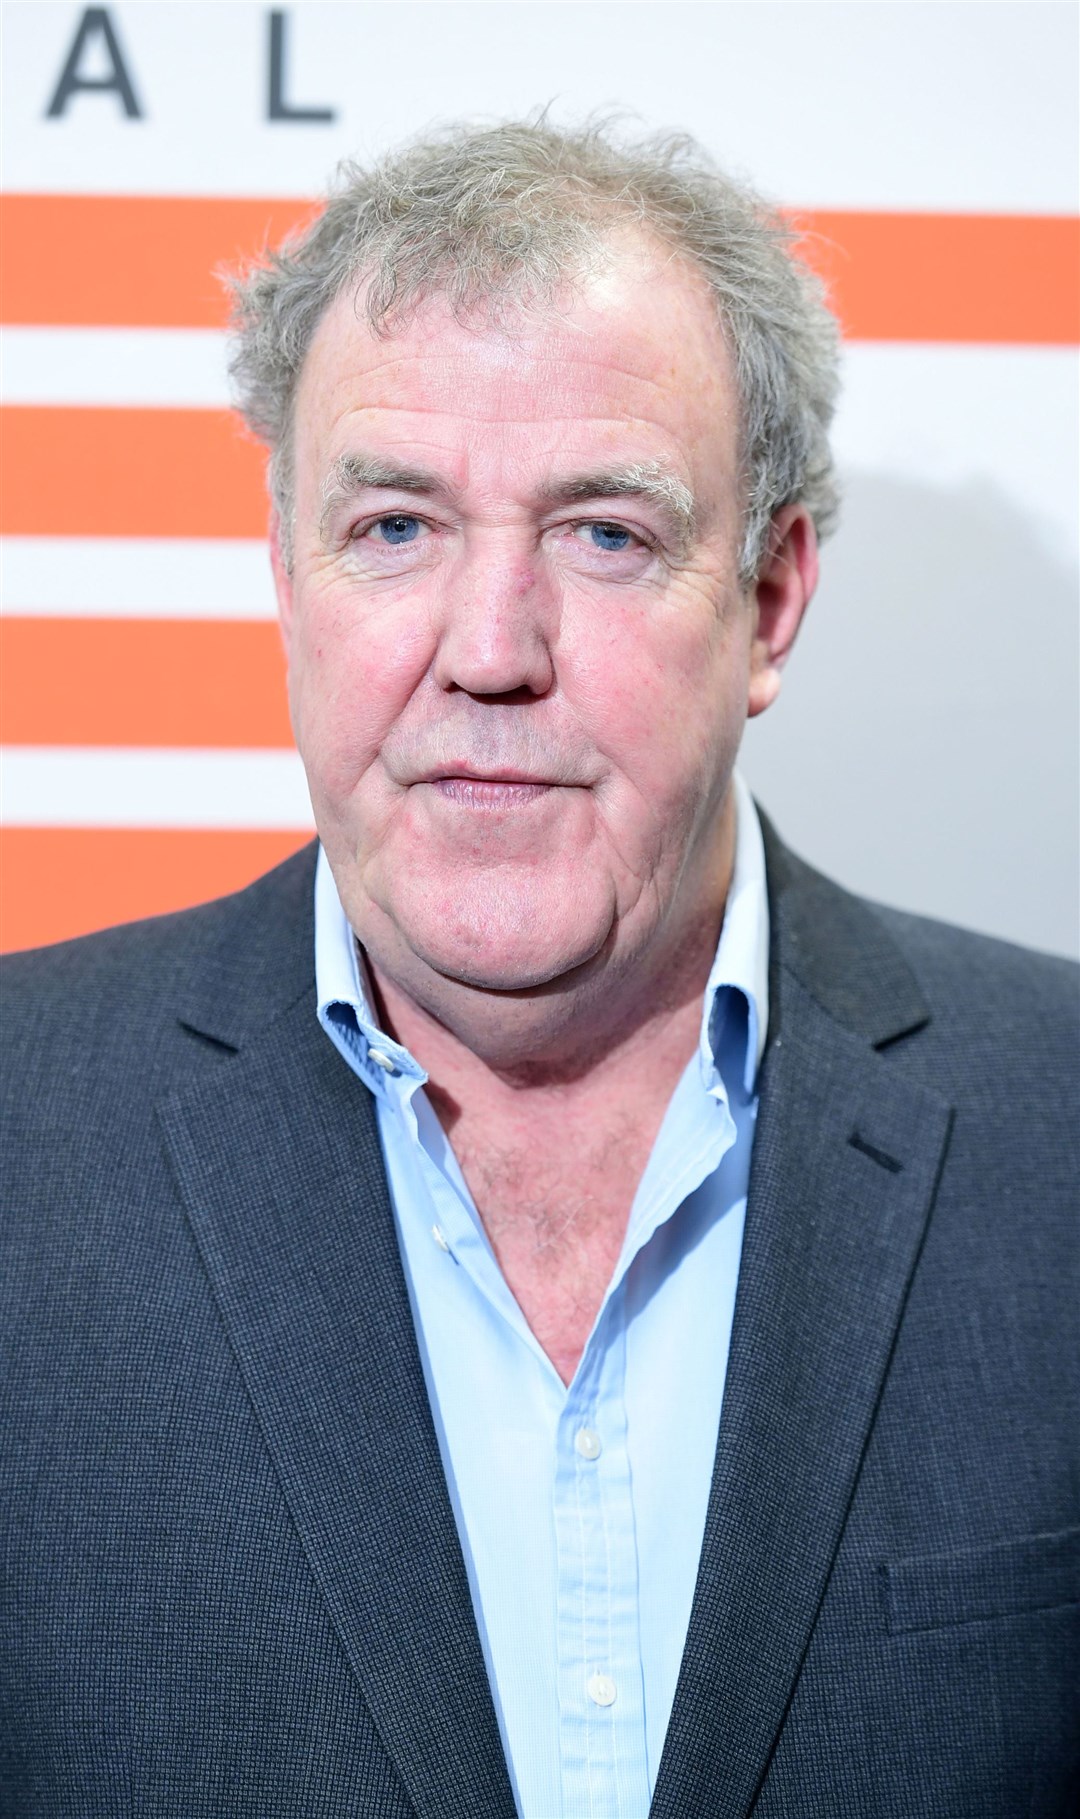 Jeremy Clarkson said he was “horrified to have caused so much hurt” with his column (Ian West/PA)